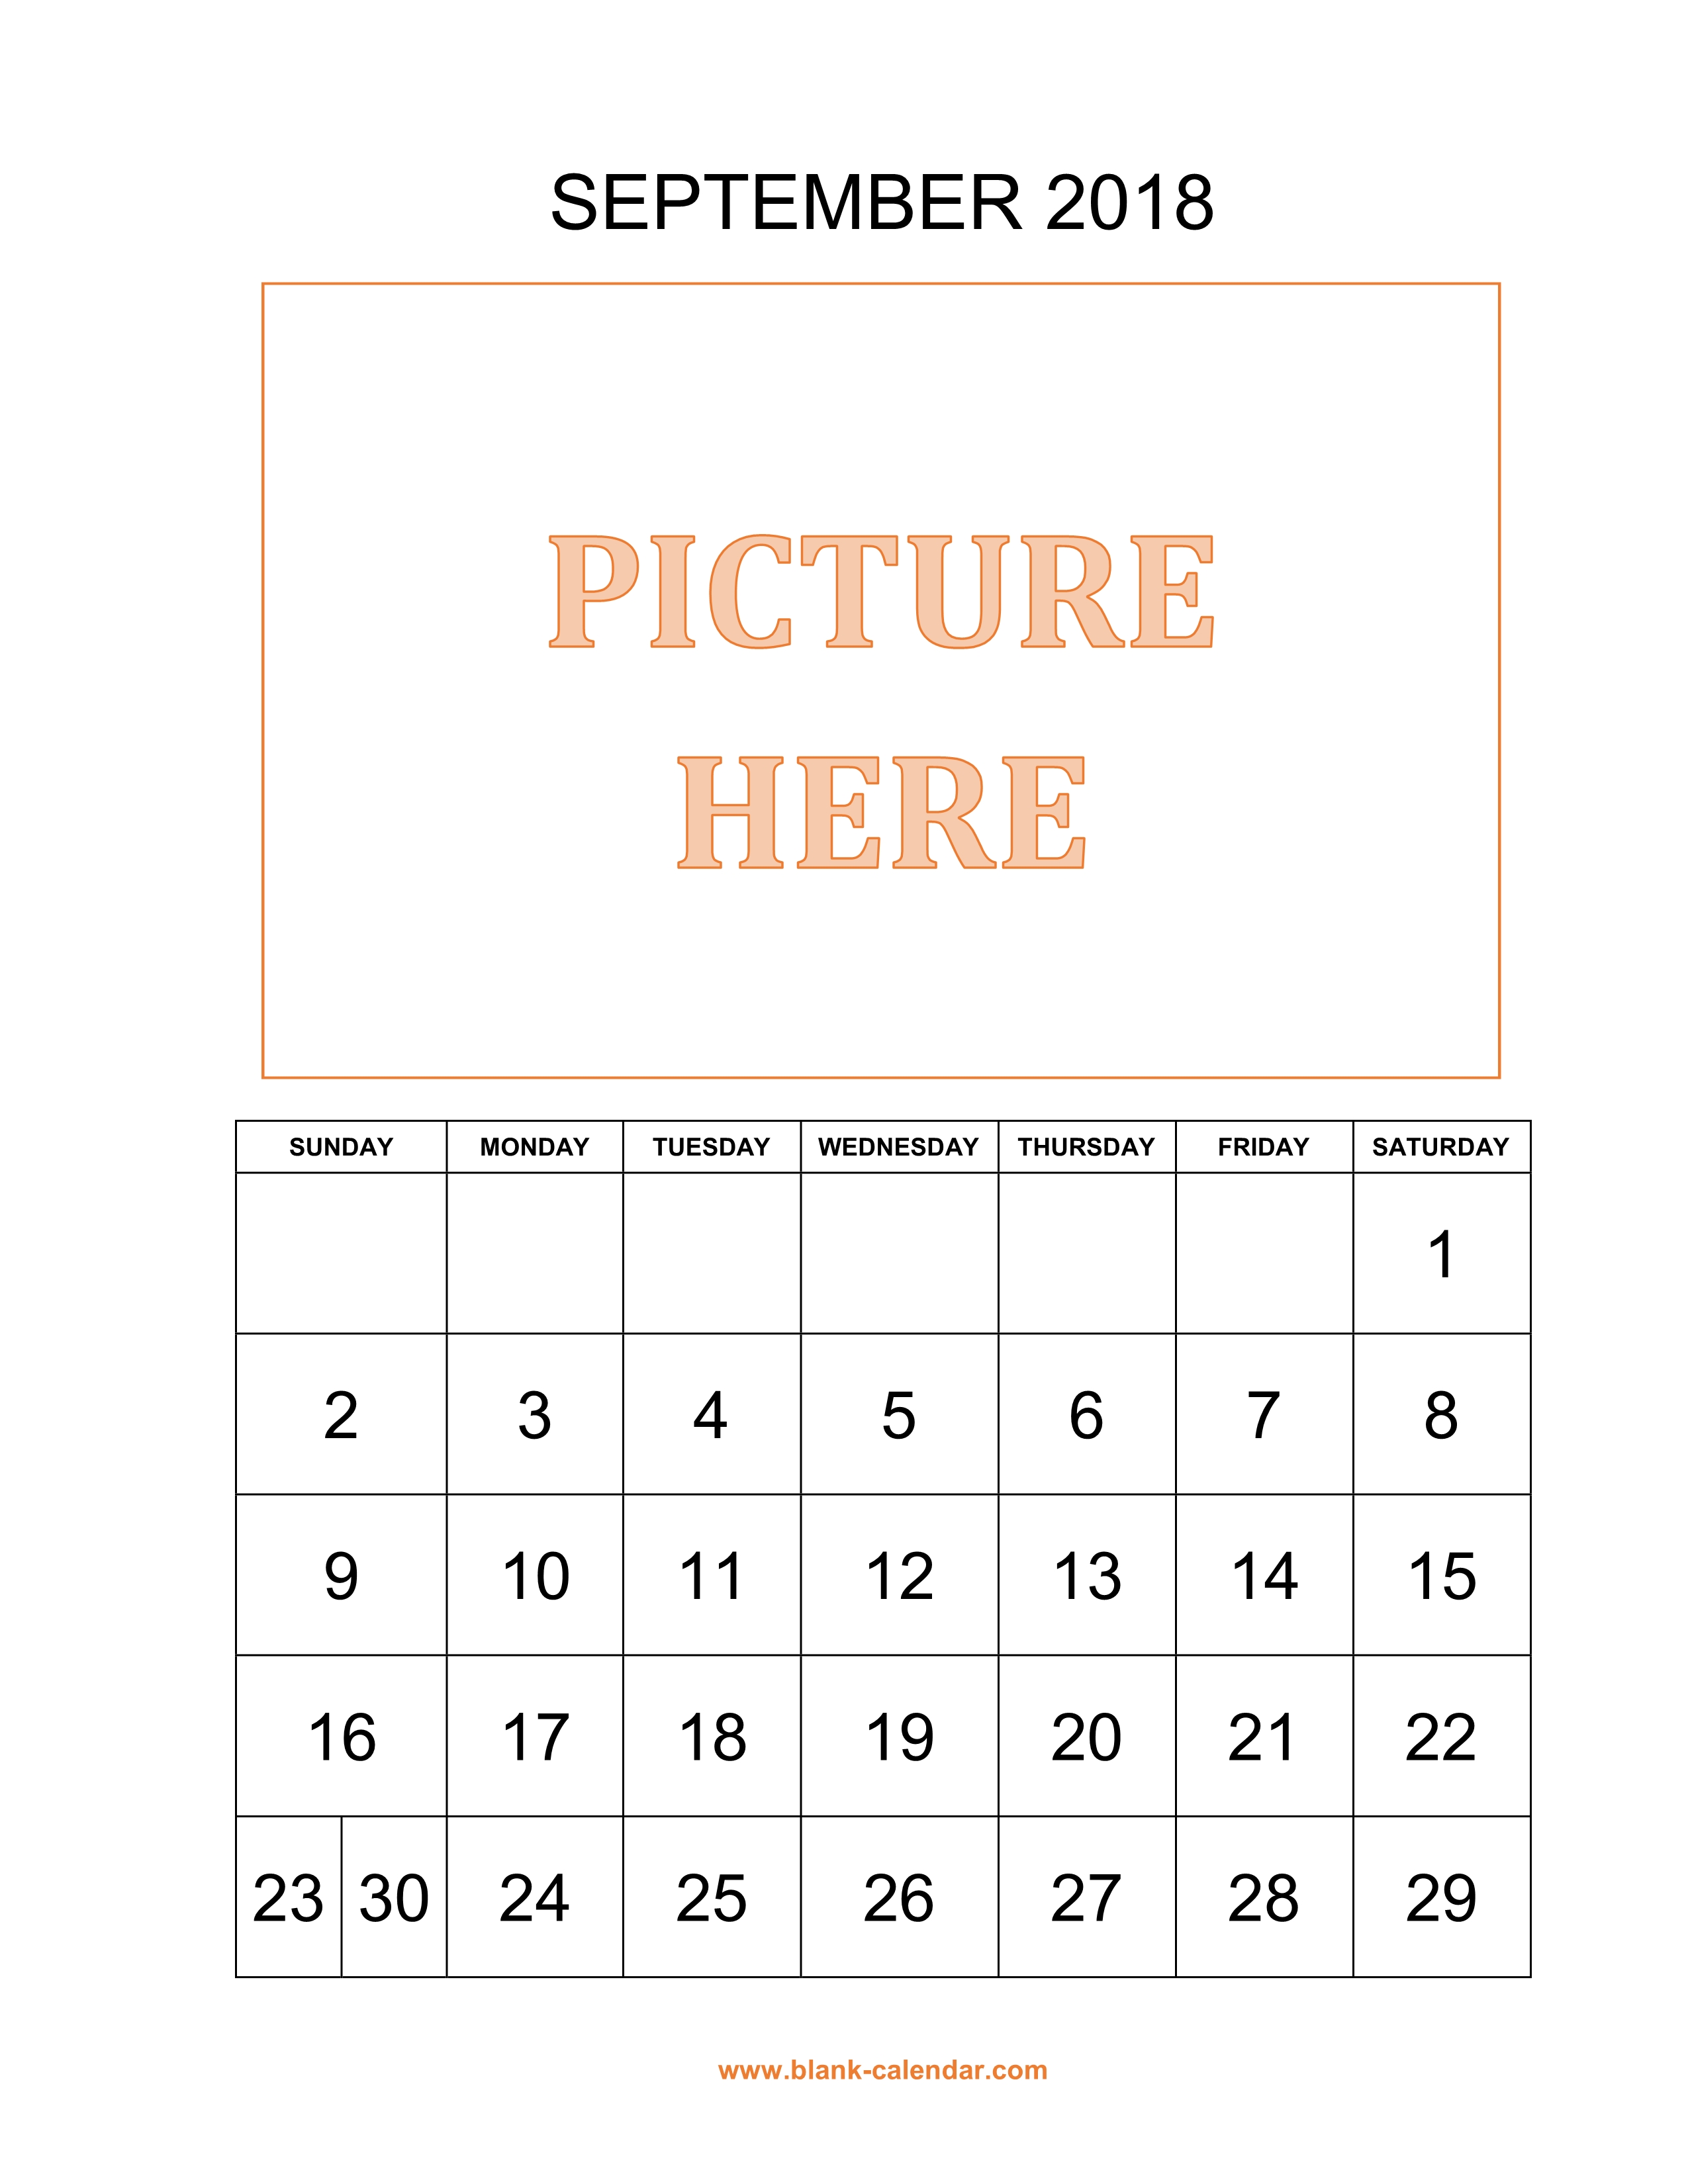 free-download-printable-september-2018-calendar-pictures-can-be-placed-at-the-top